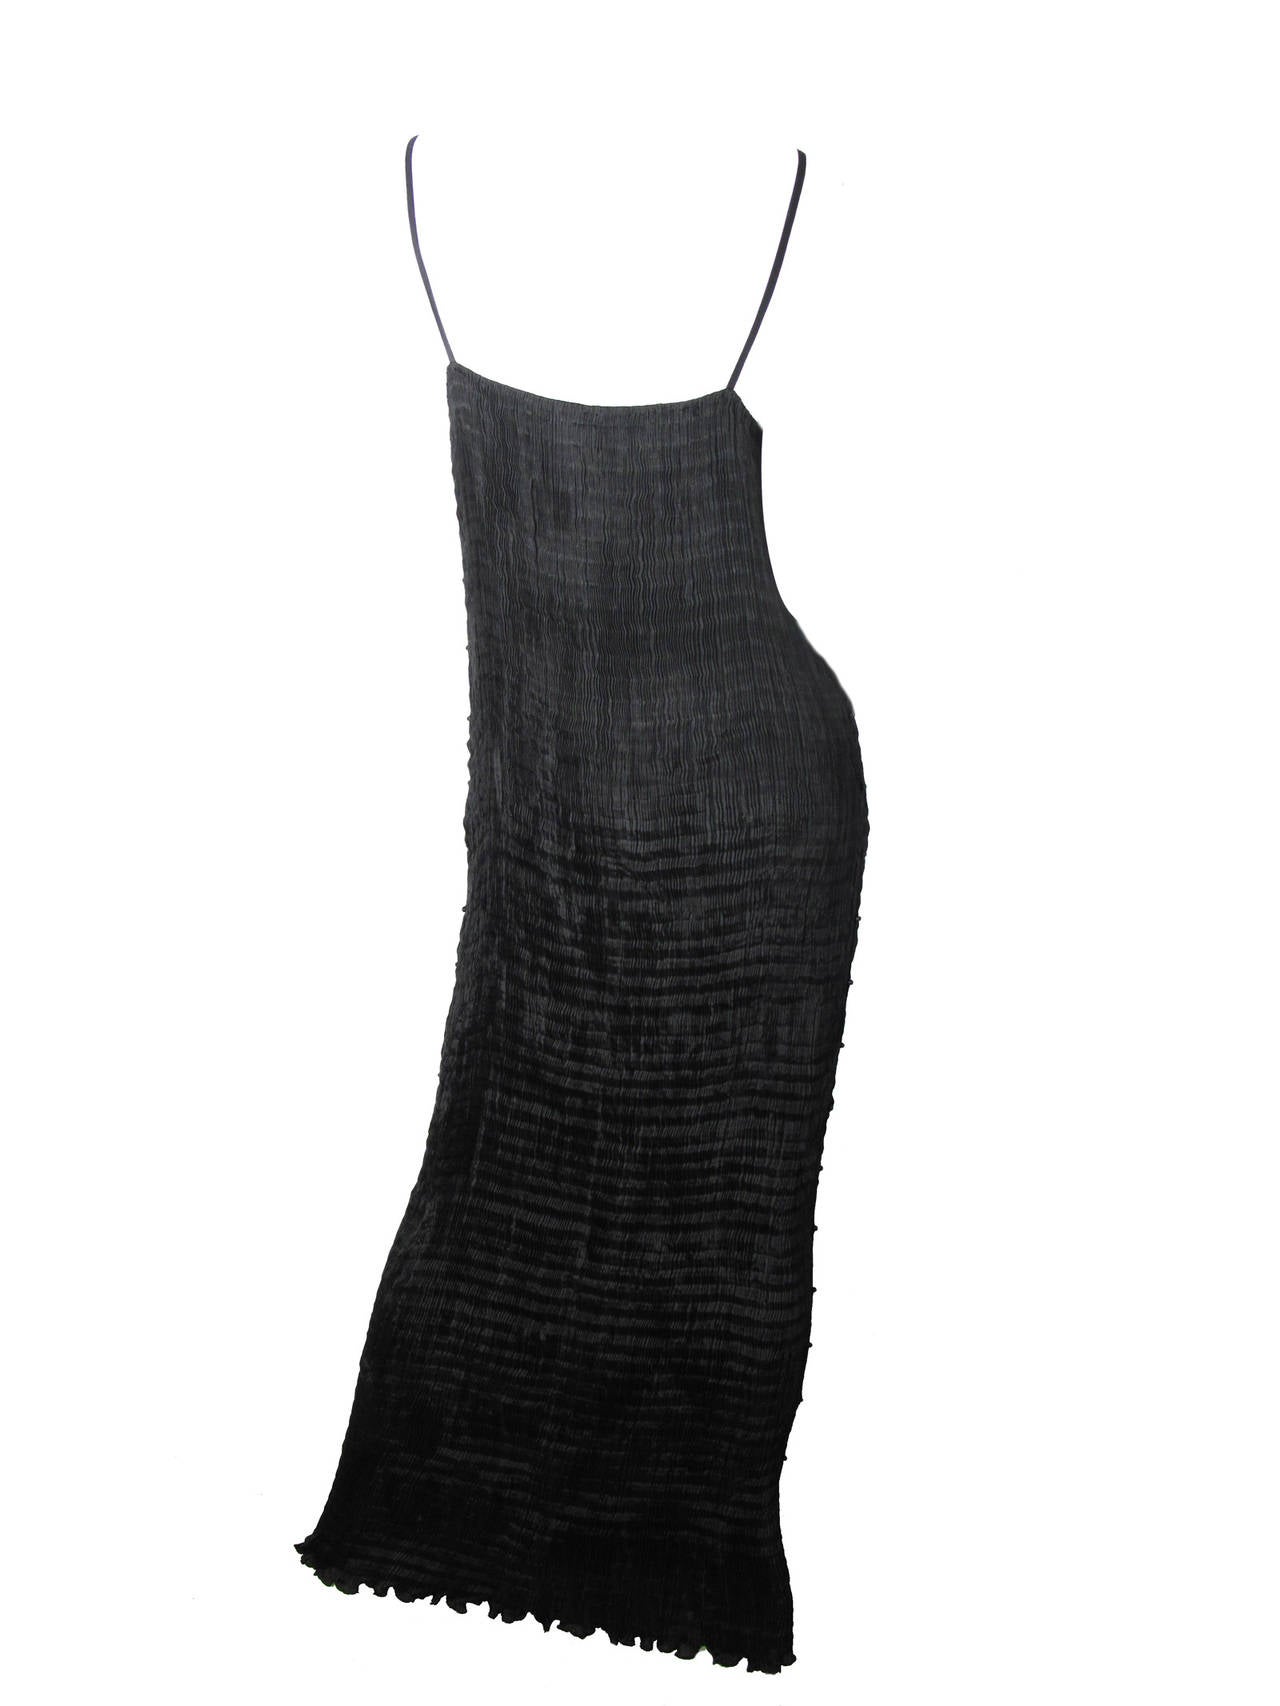 Venetia Studium Fortuny Pleated Black Dress, 1980s  In Excellent Condition In Austin, TX